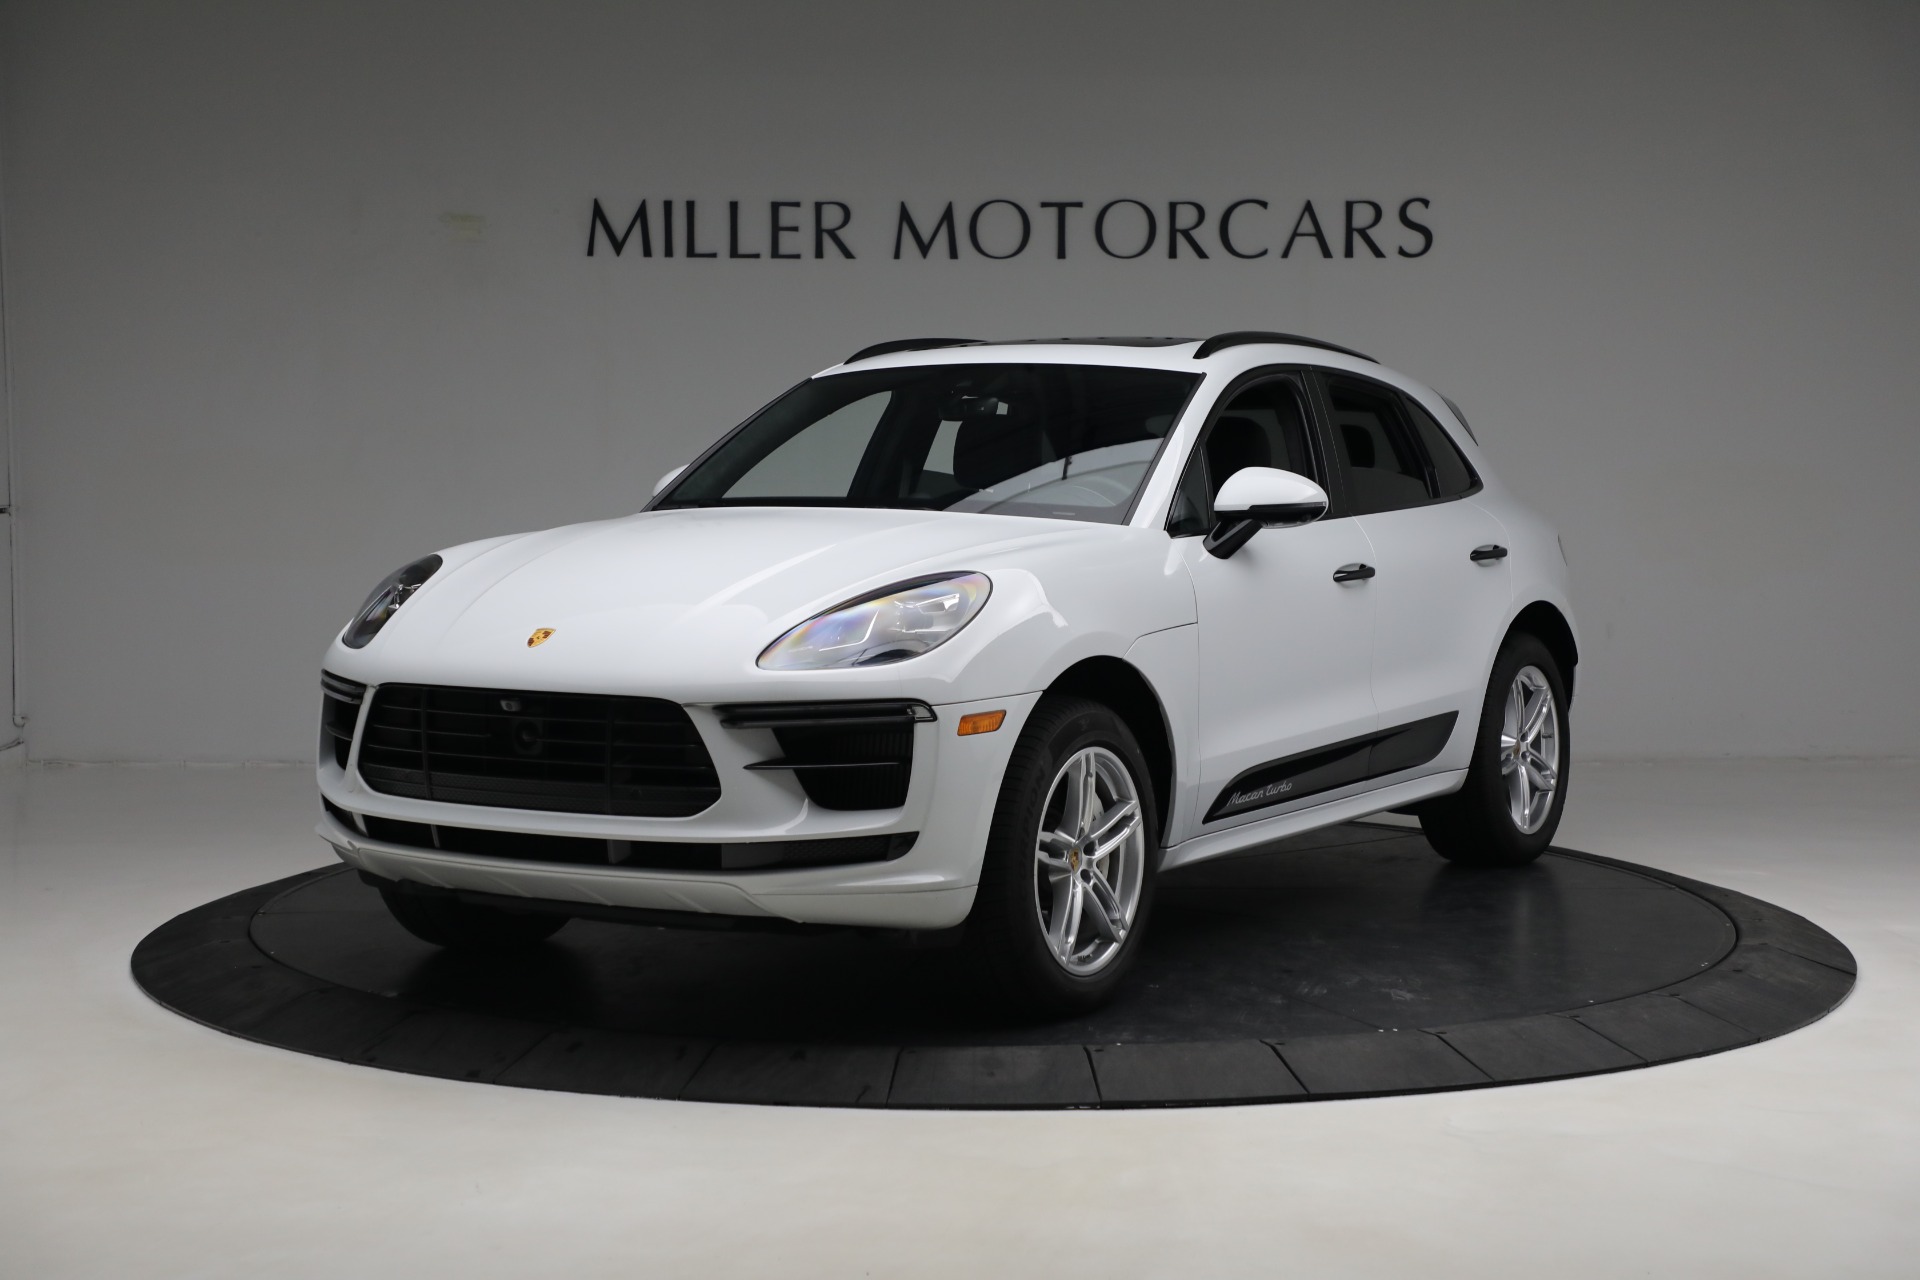 Used 2021 Porsche Macan Turbo for sale $84,900 at Pagani of Greenwich in Greenwich CT 06830 1